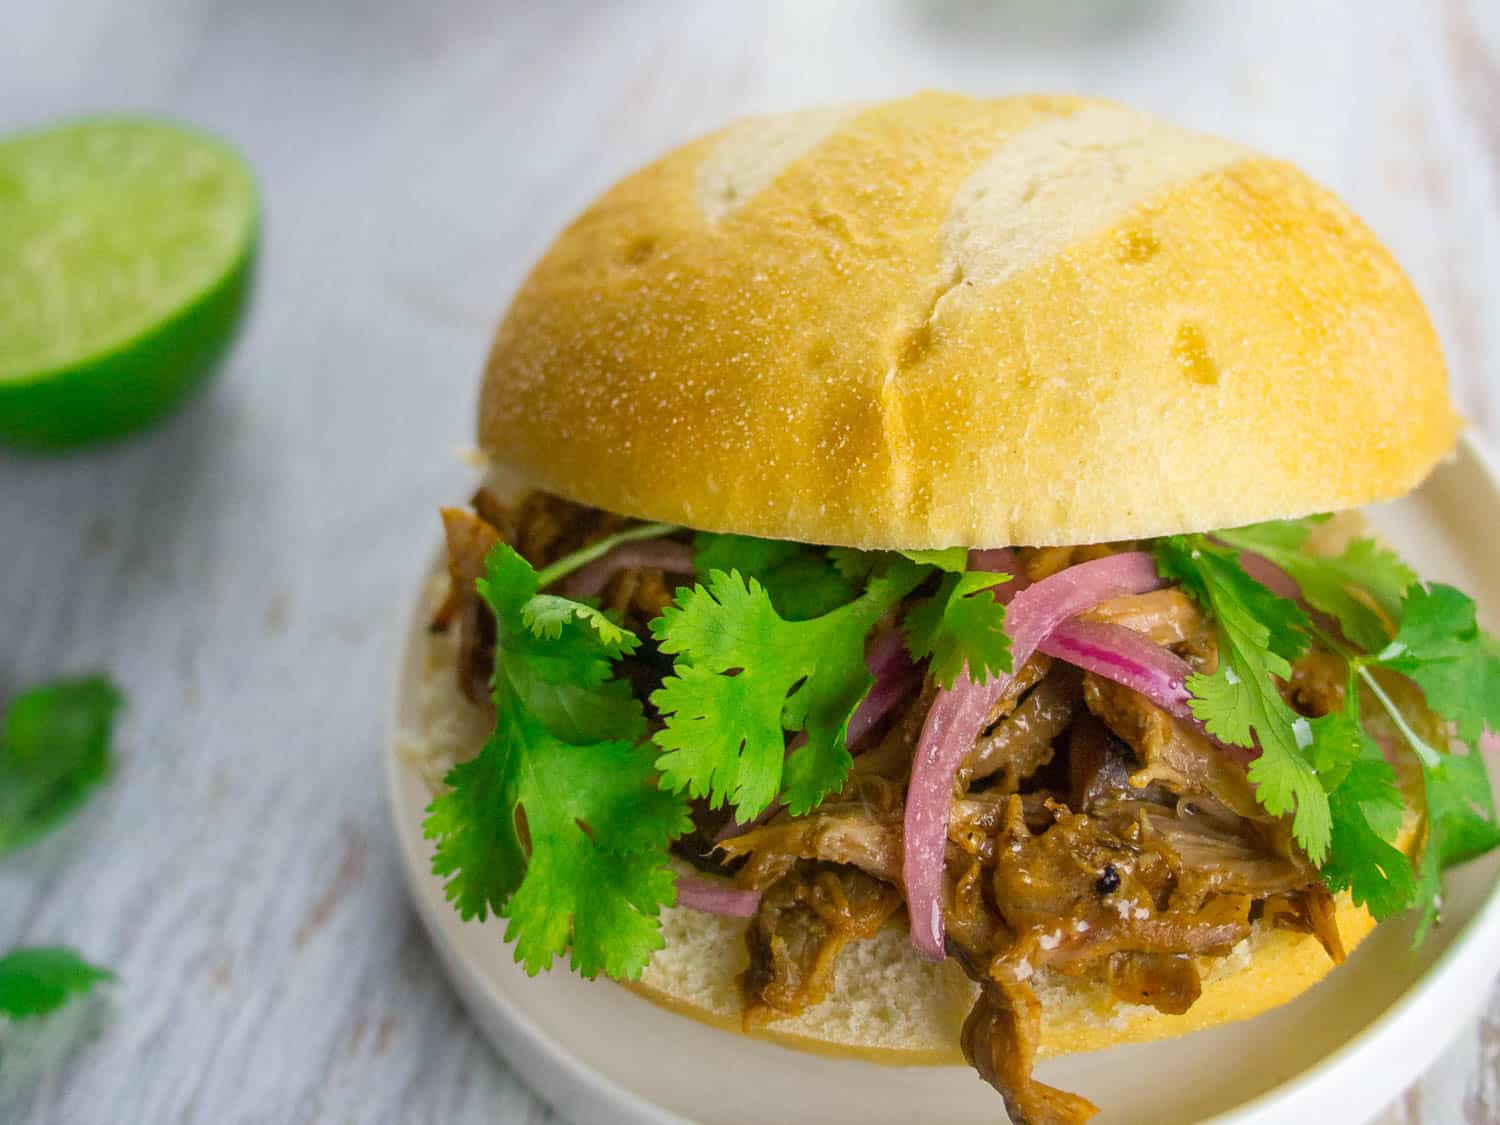 Cochinita pibil from Mexico is one of the best sandwiches in the world.